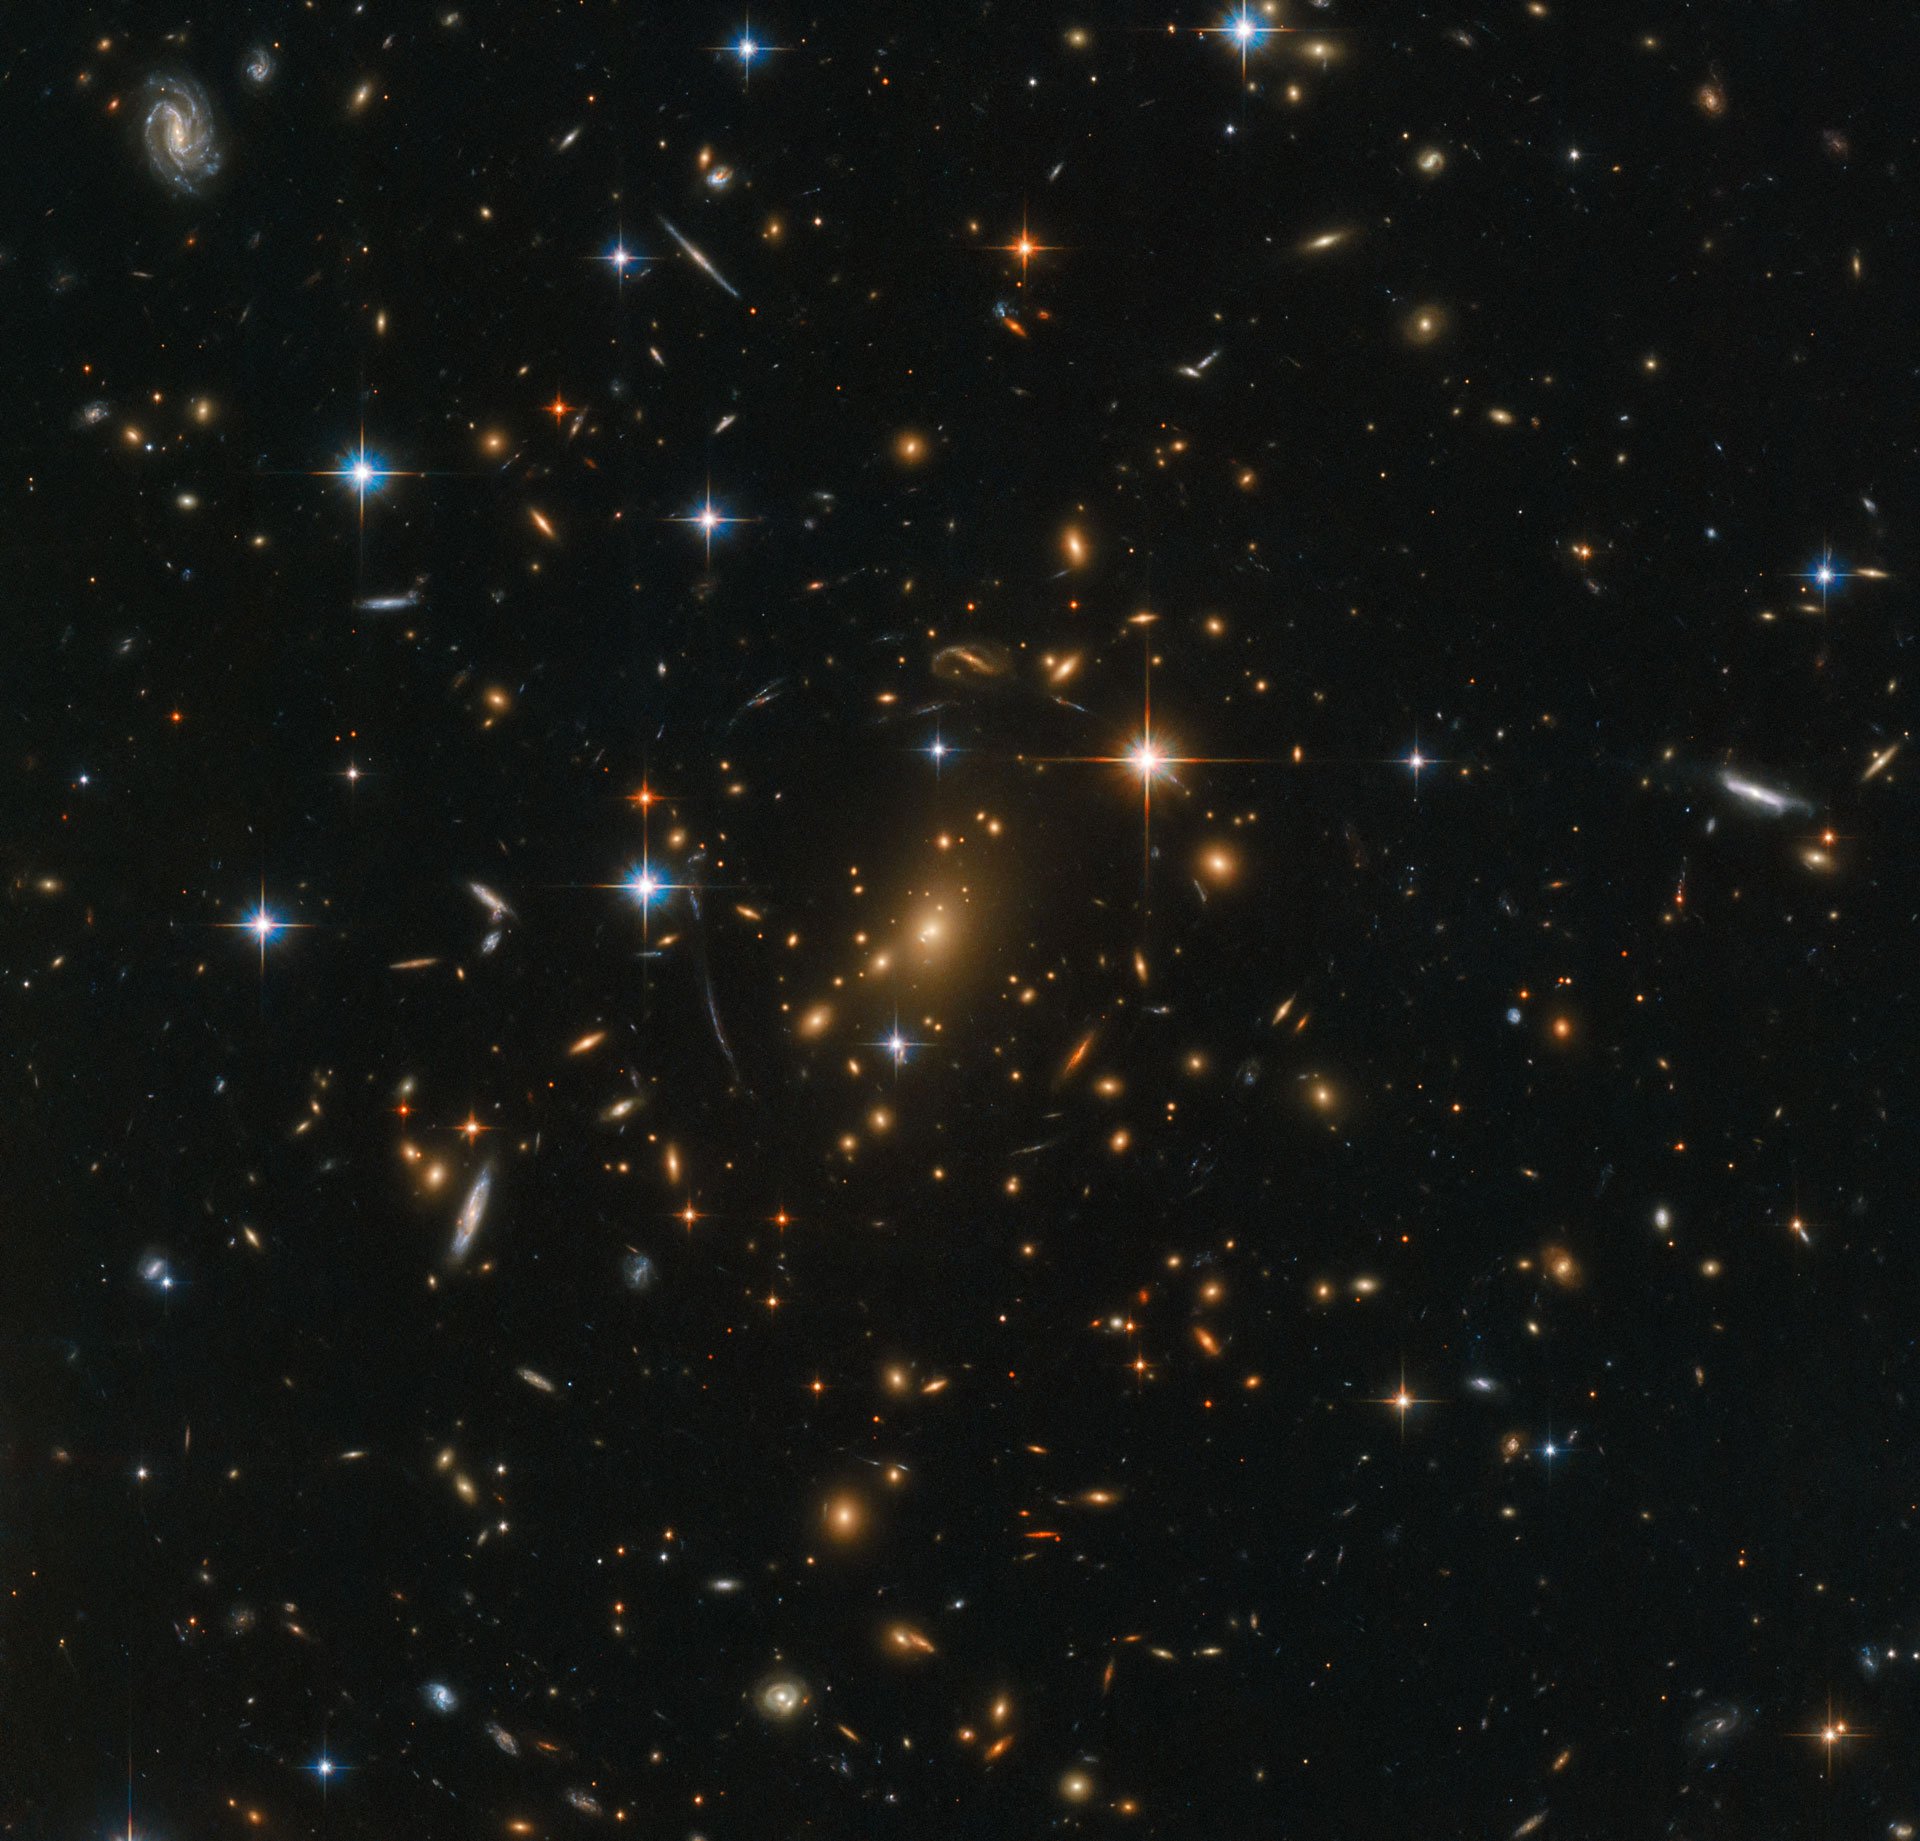 Spectacular Hubble Space Telescope Image Of Galaxy Clusters